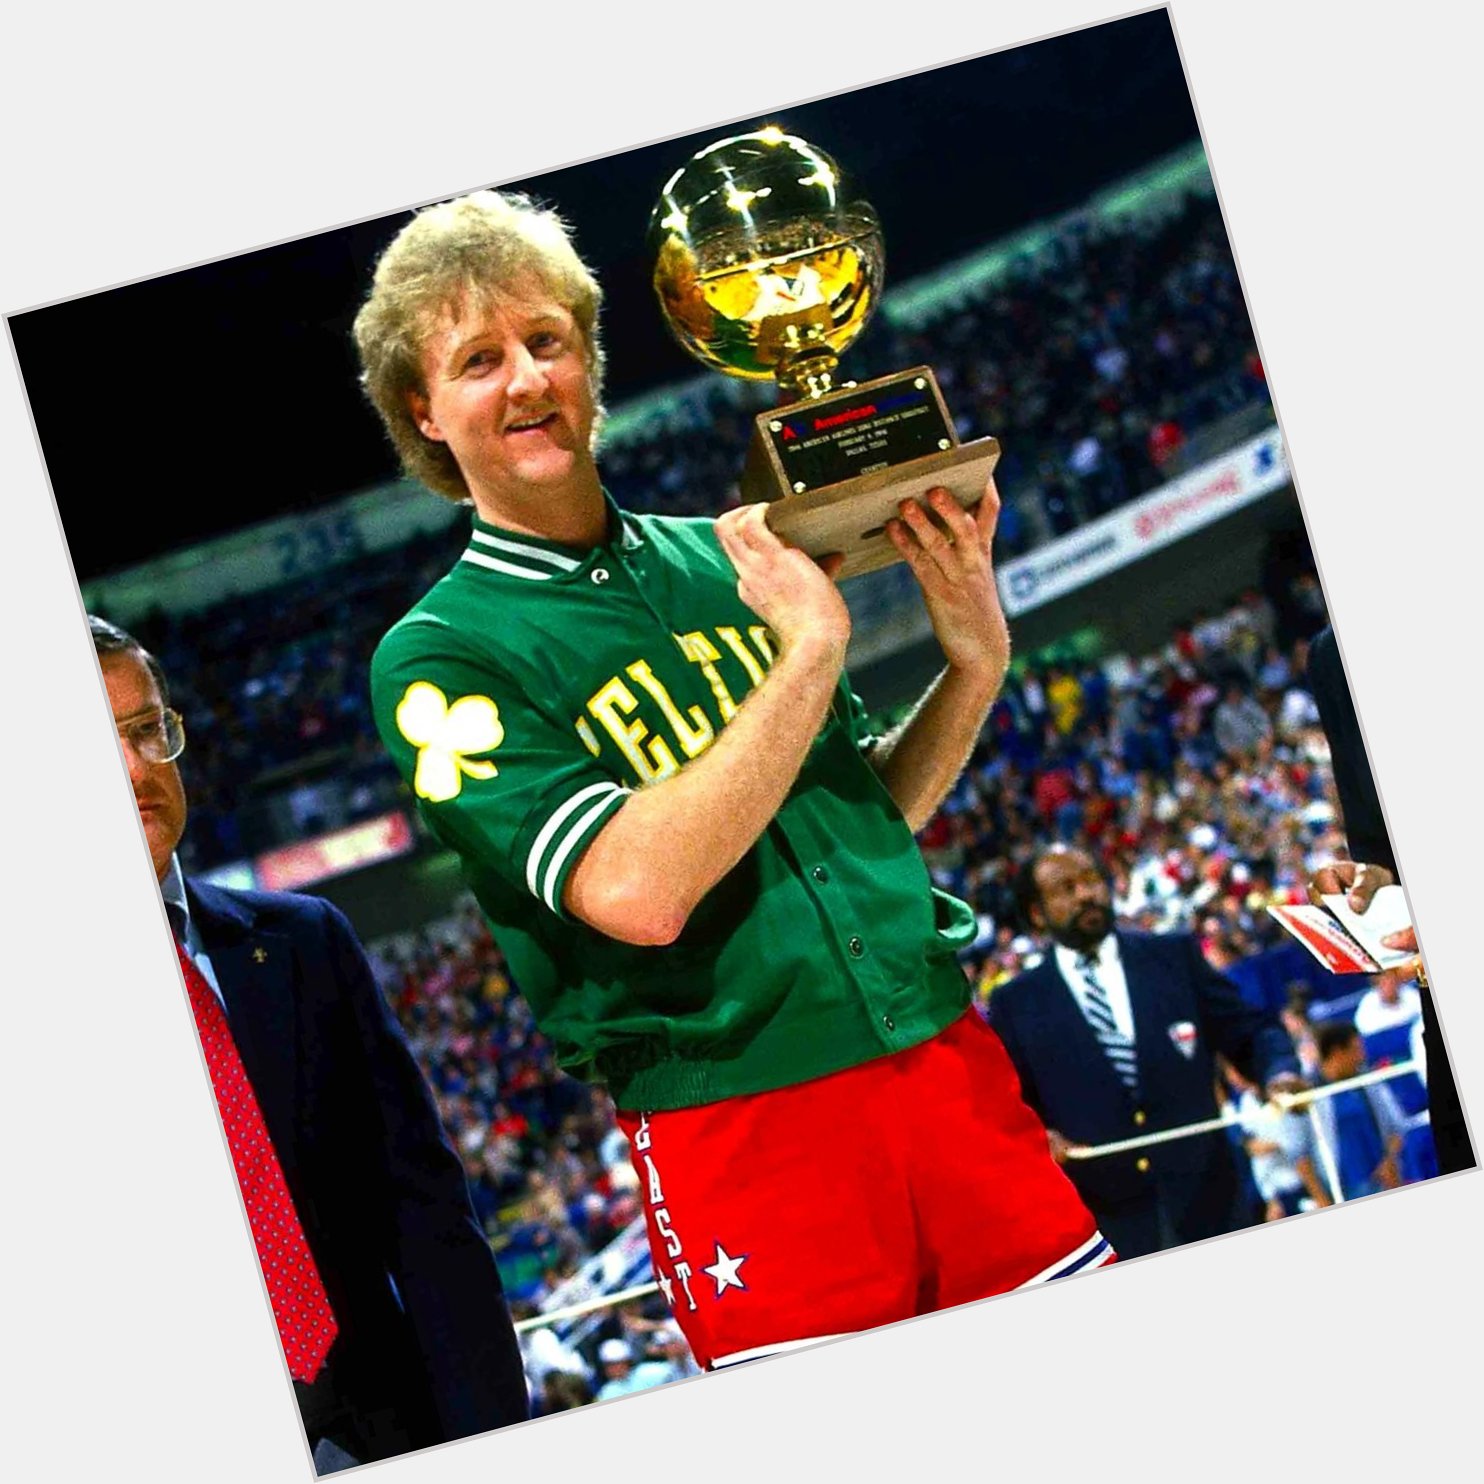 And before I forget, happy 59th birthday to Larry Bird. Please shoot the 3.... 